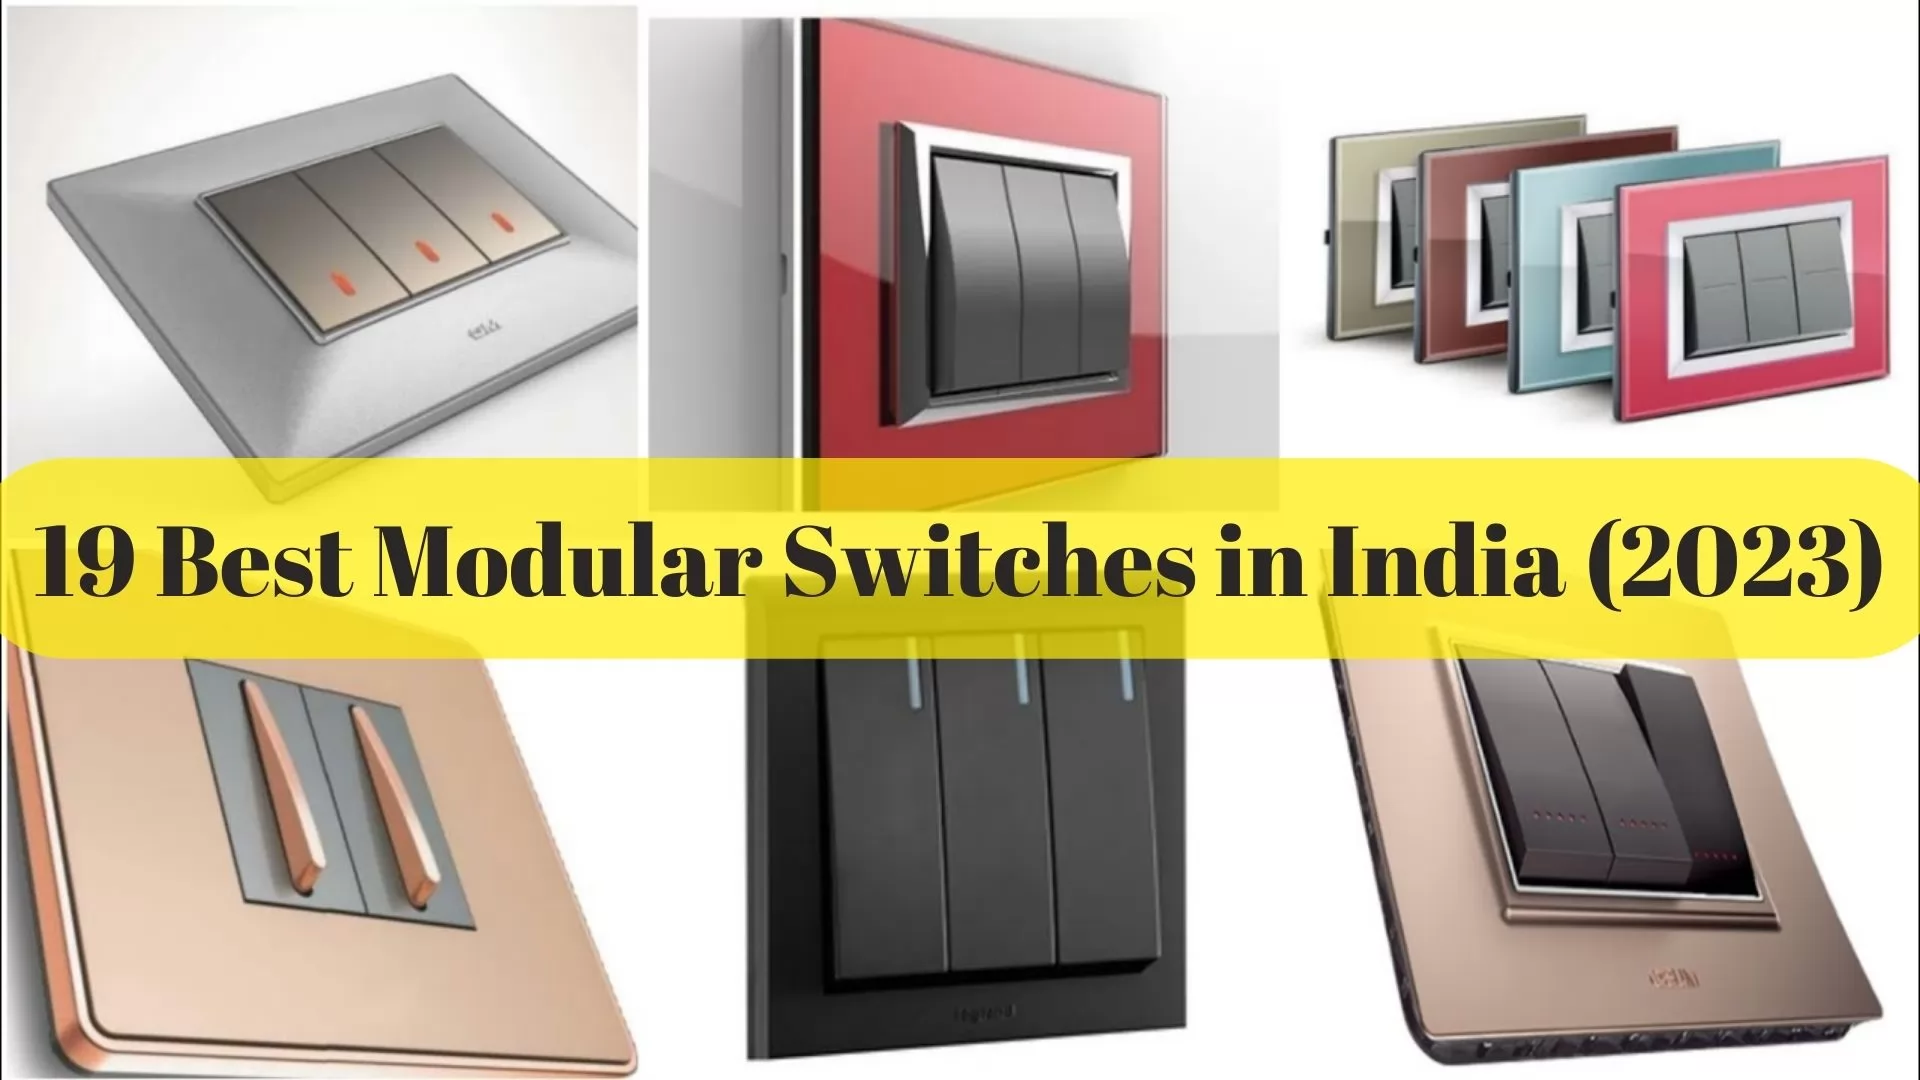 19 Best Modular Switches in India (2023)